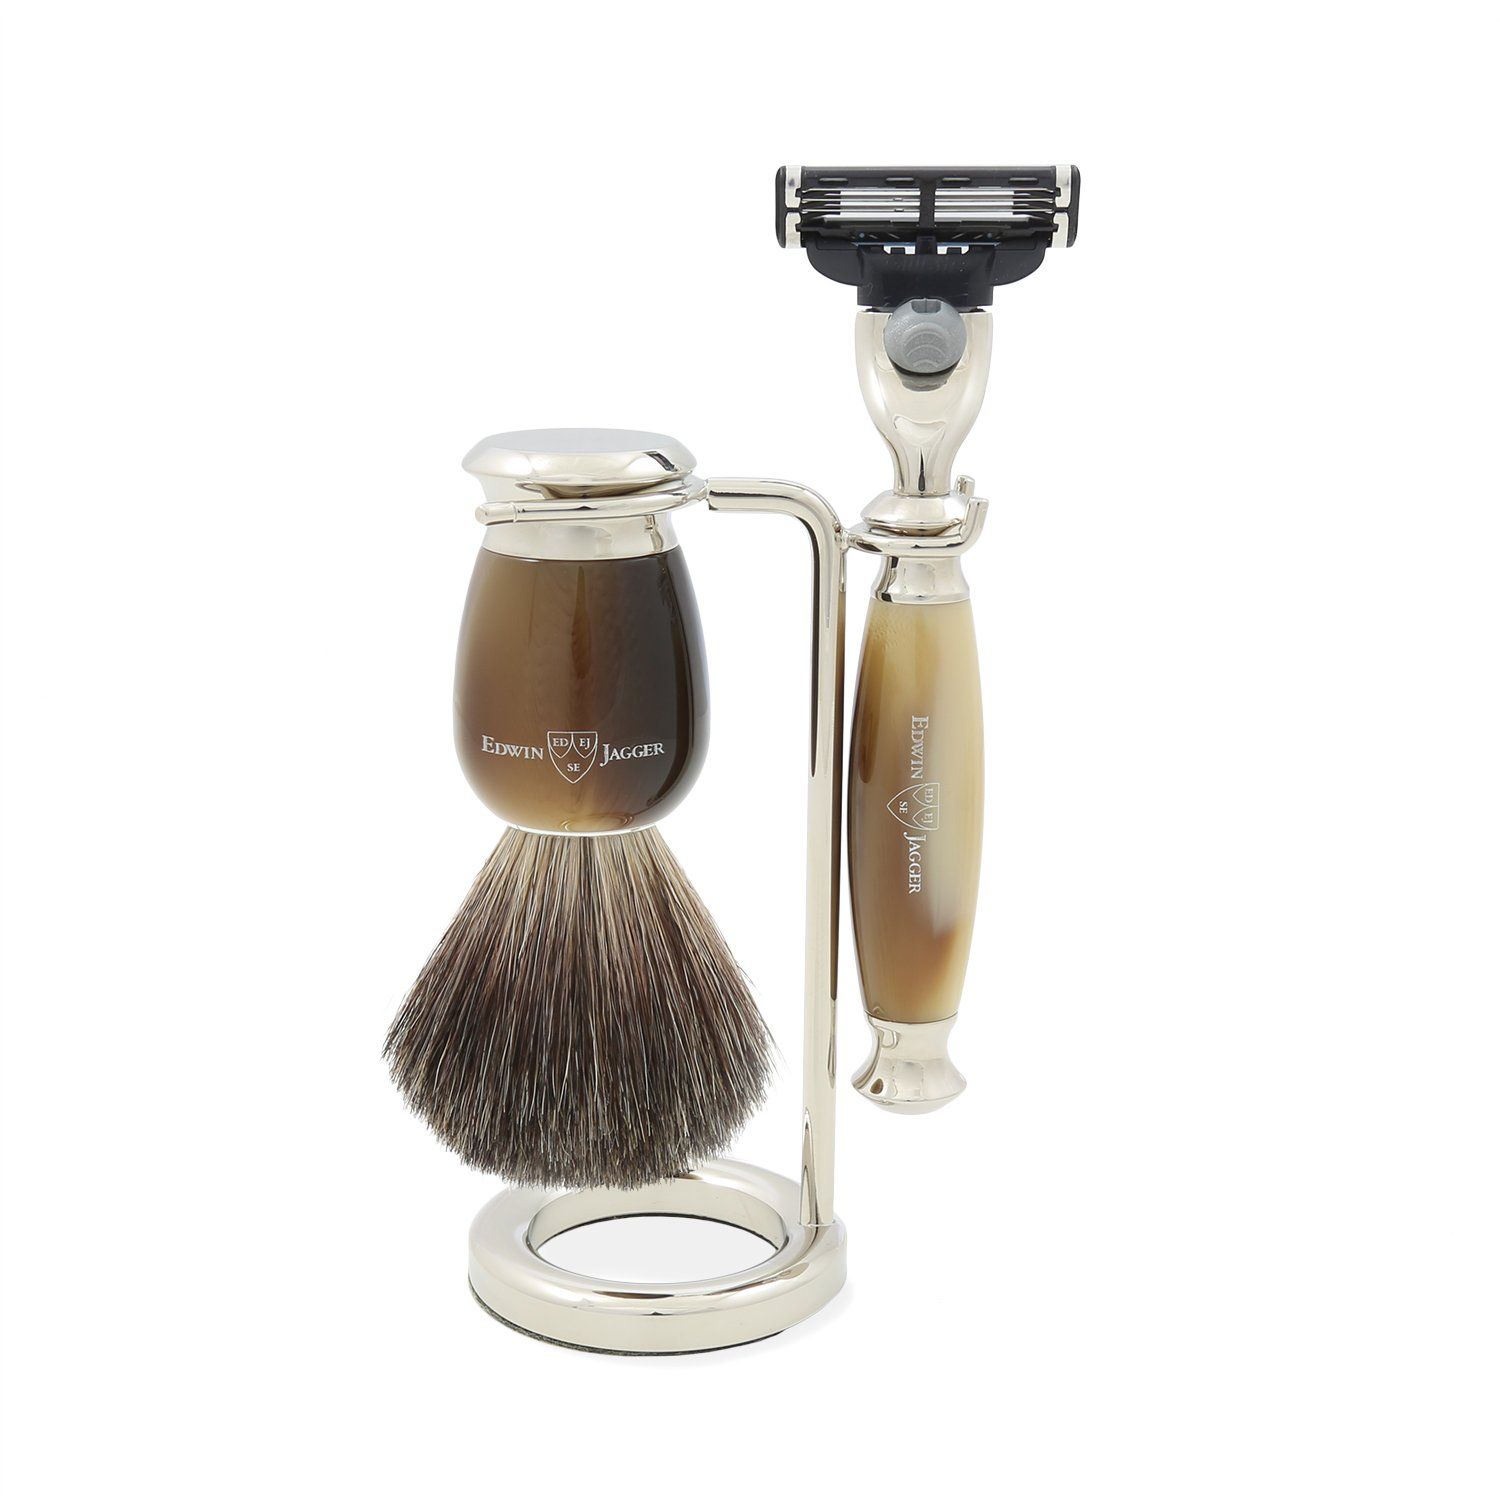 Edwin Jagger S81M582AMZ Simulated Horn and Nickel Shaving Set, Brown/Cream | Amazon (US)